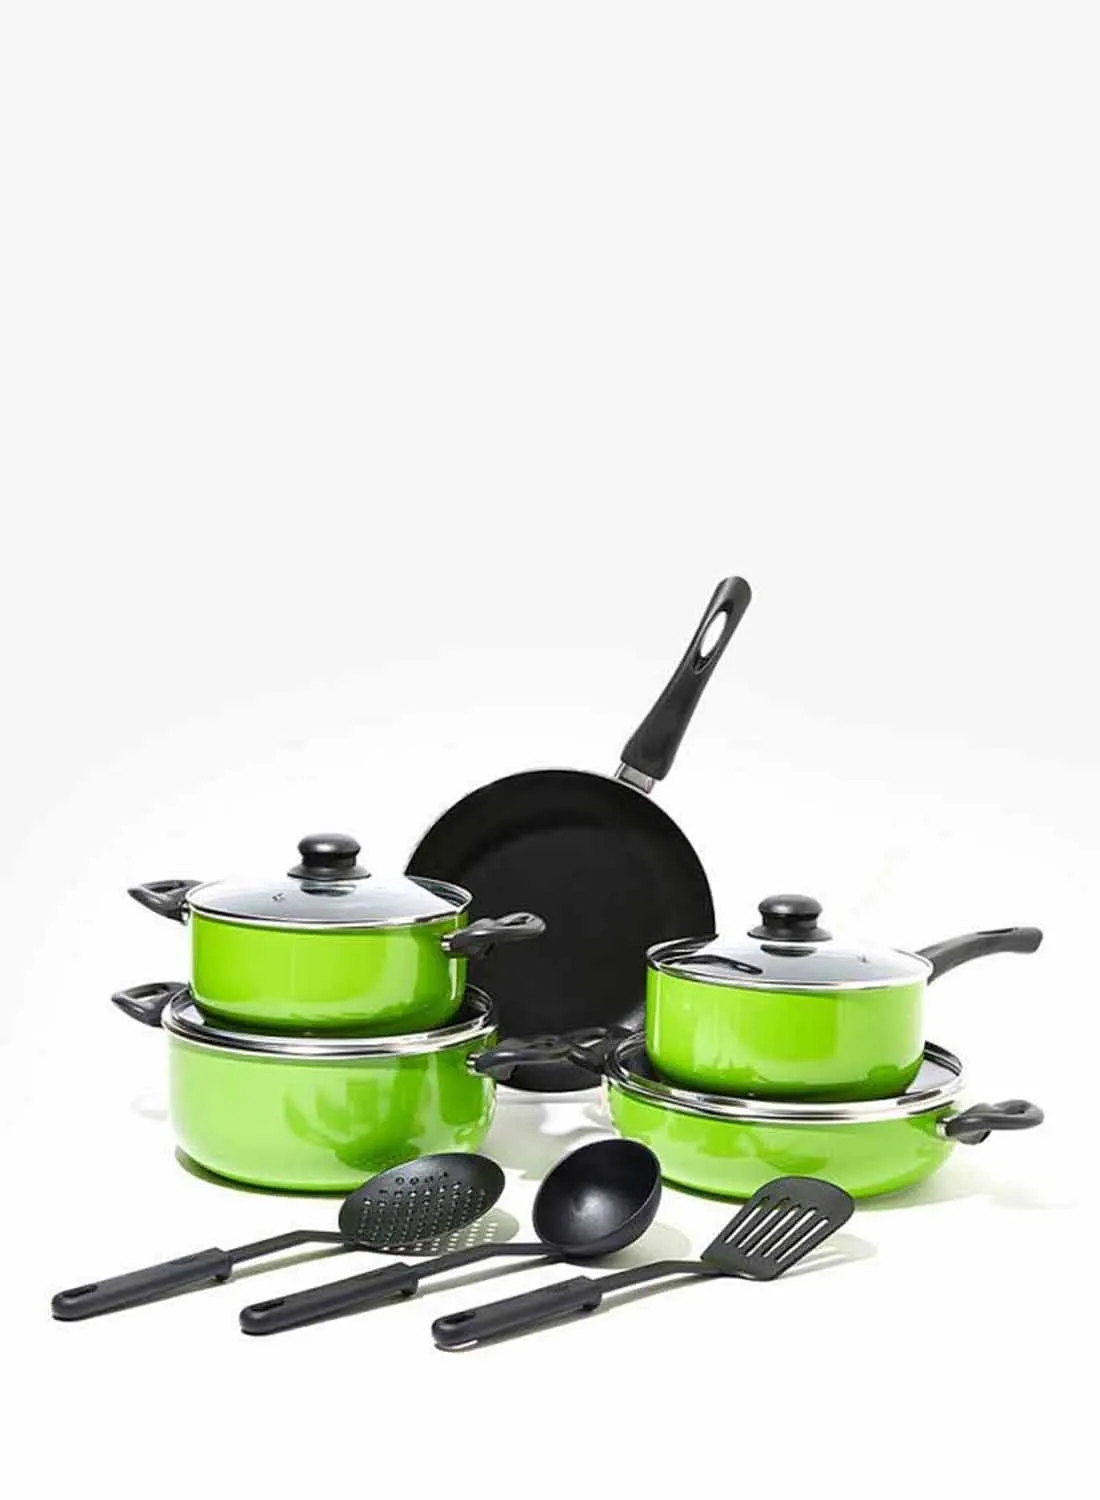 Amal 12 Piece Cookware Set - Aluminum Pots And Pans - Non-Stick Surface - Tempered Glass Lids - PFOA Free - Frying Pan, Casserole With Lid, Saucepan With Lid, Kitchen Tools - Green